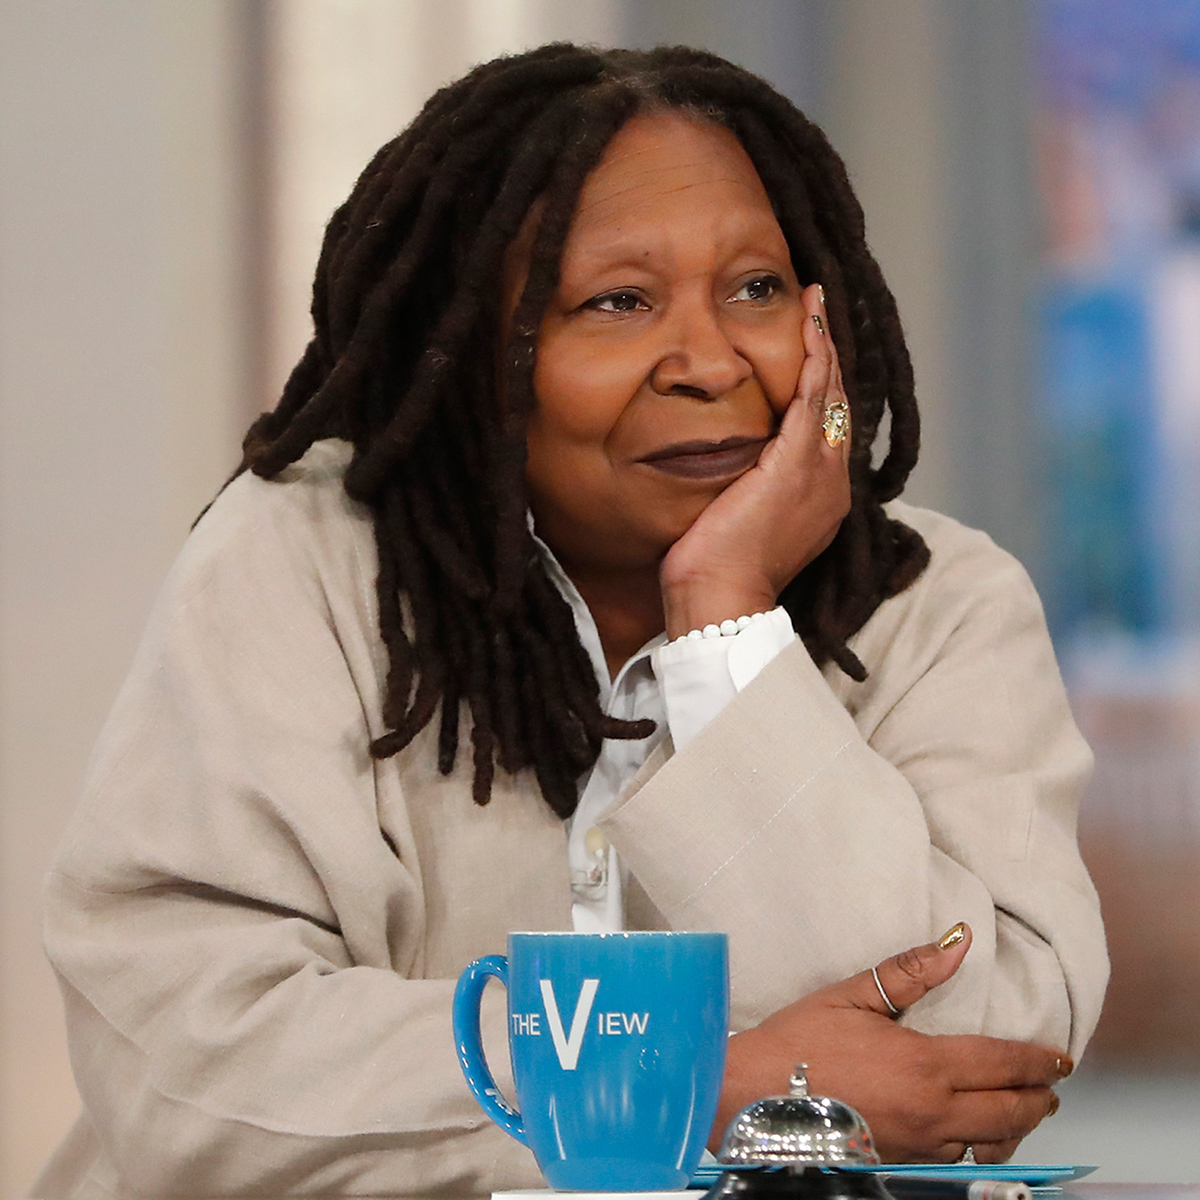 Why Whoopi Goldberg Missed The View’s Season 27 Premiere